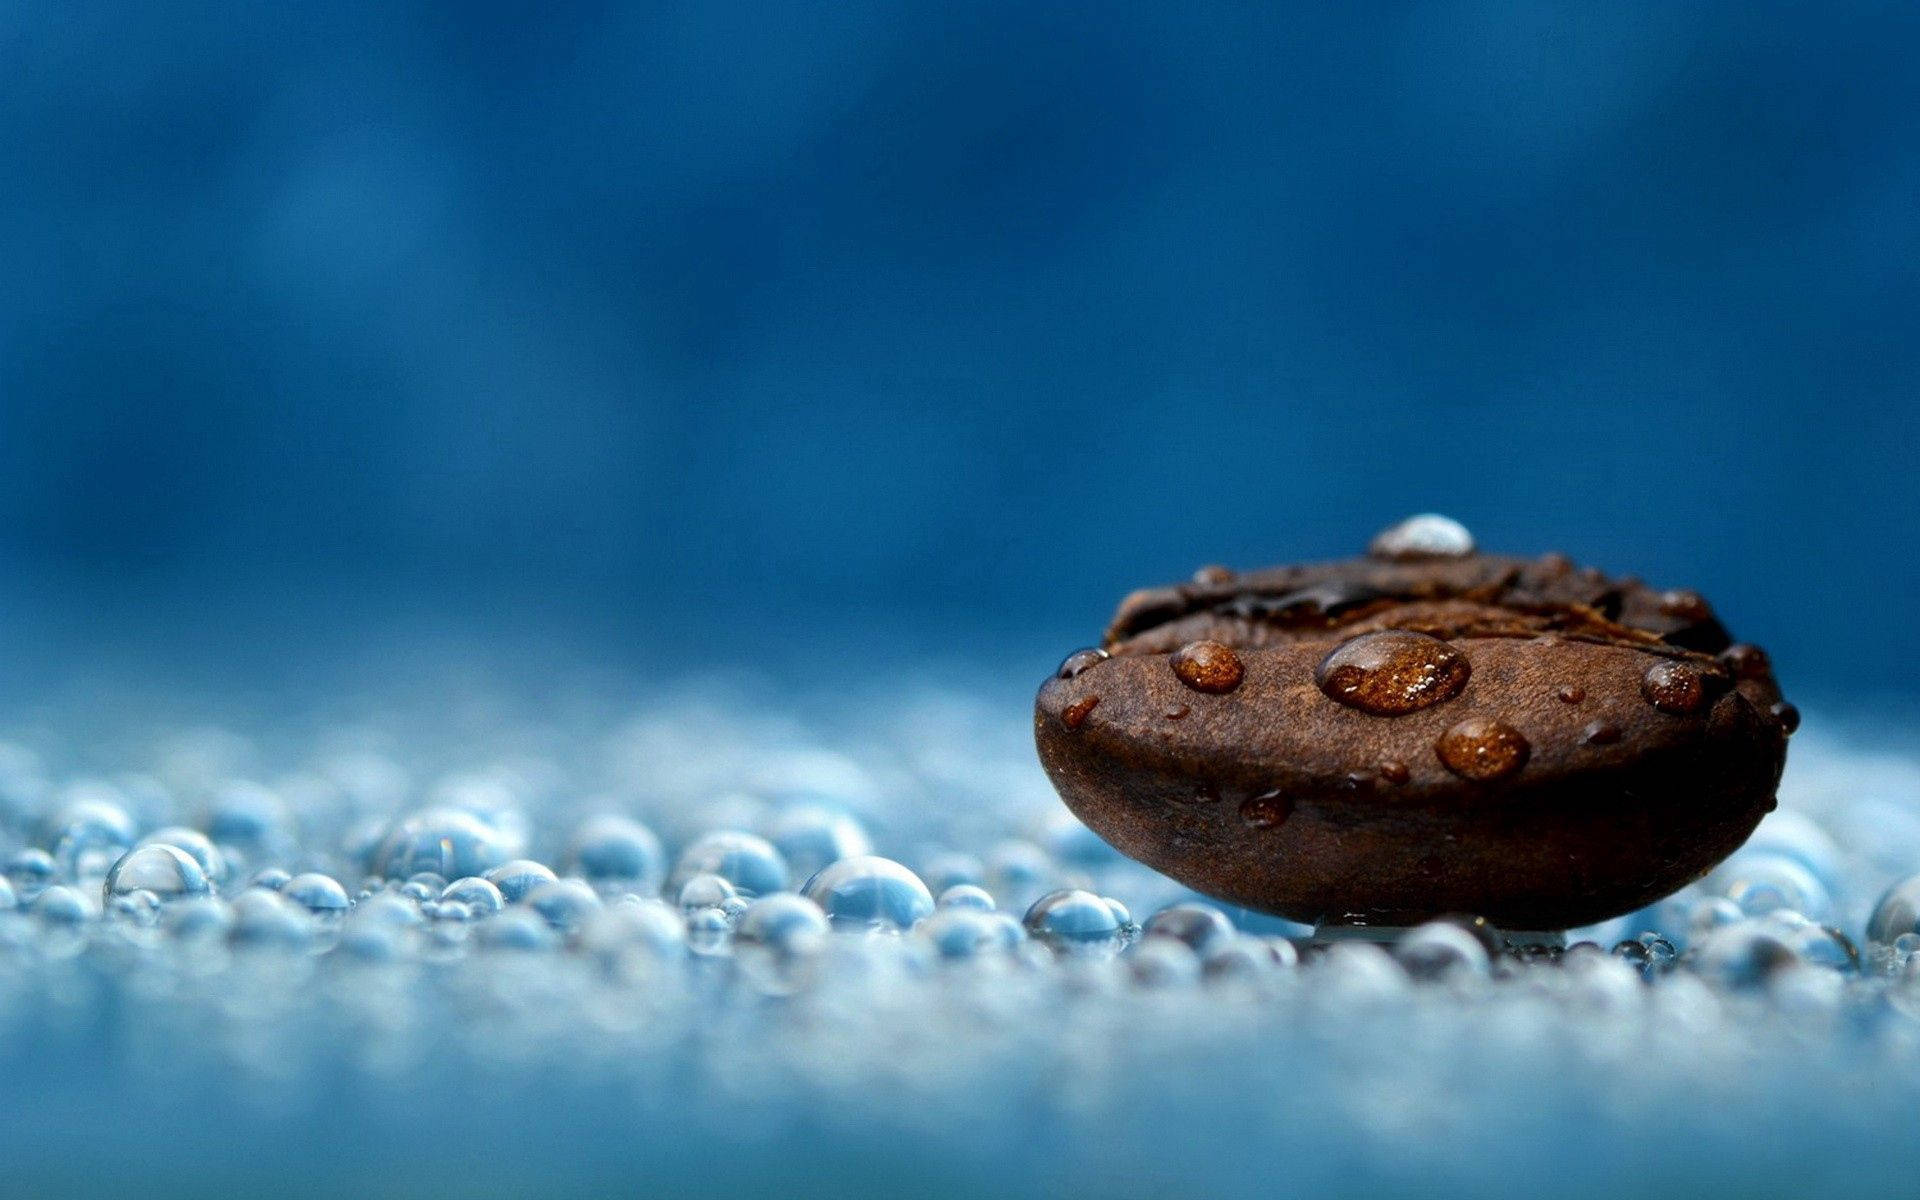 Water Droplets On Coffee Bean Background